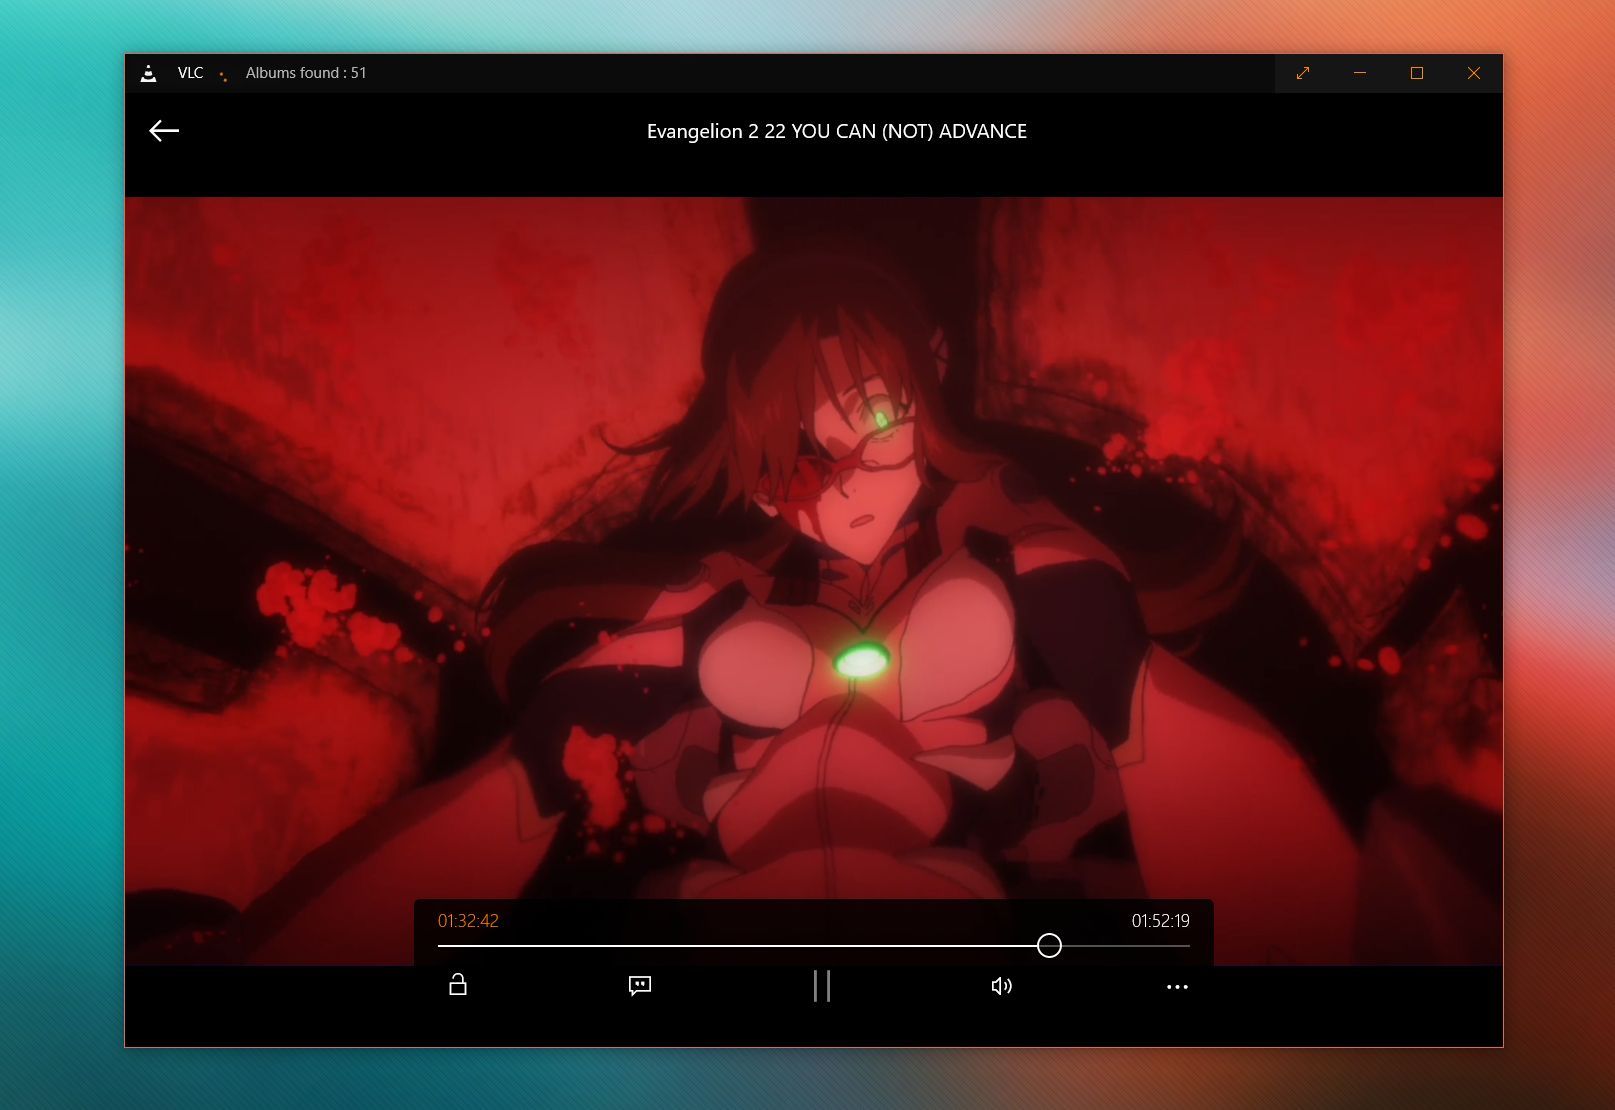 Download Vlc Video Player For Windows 10